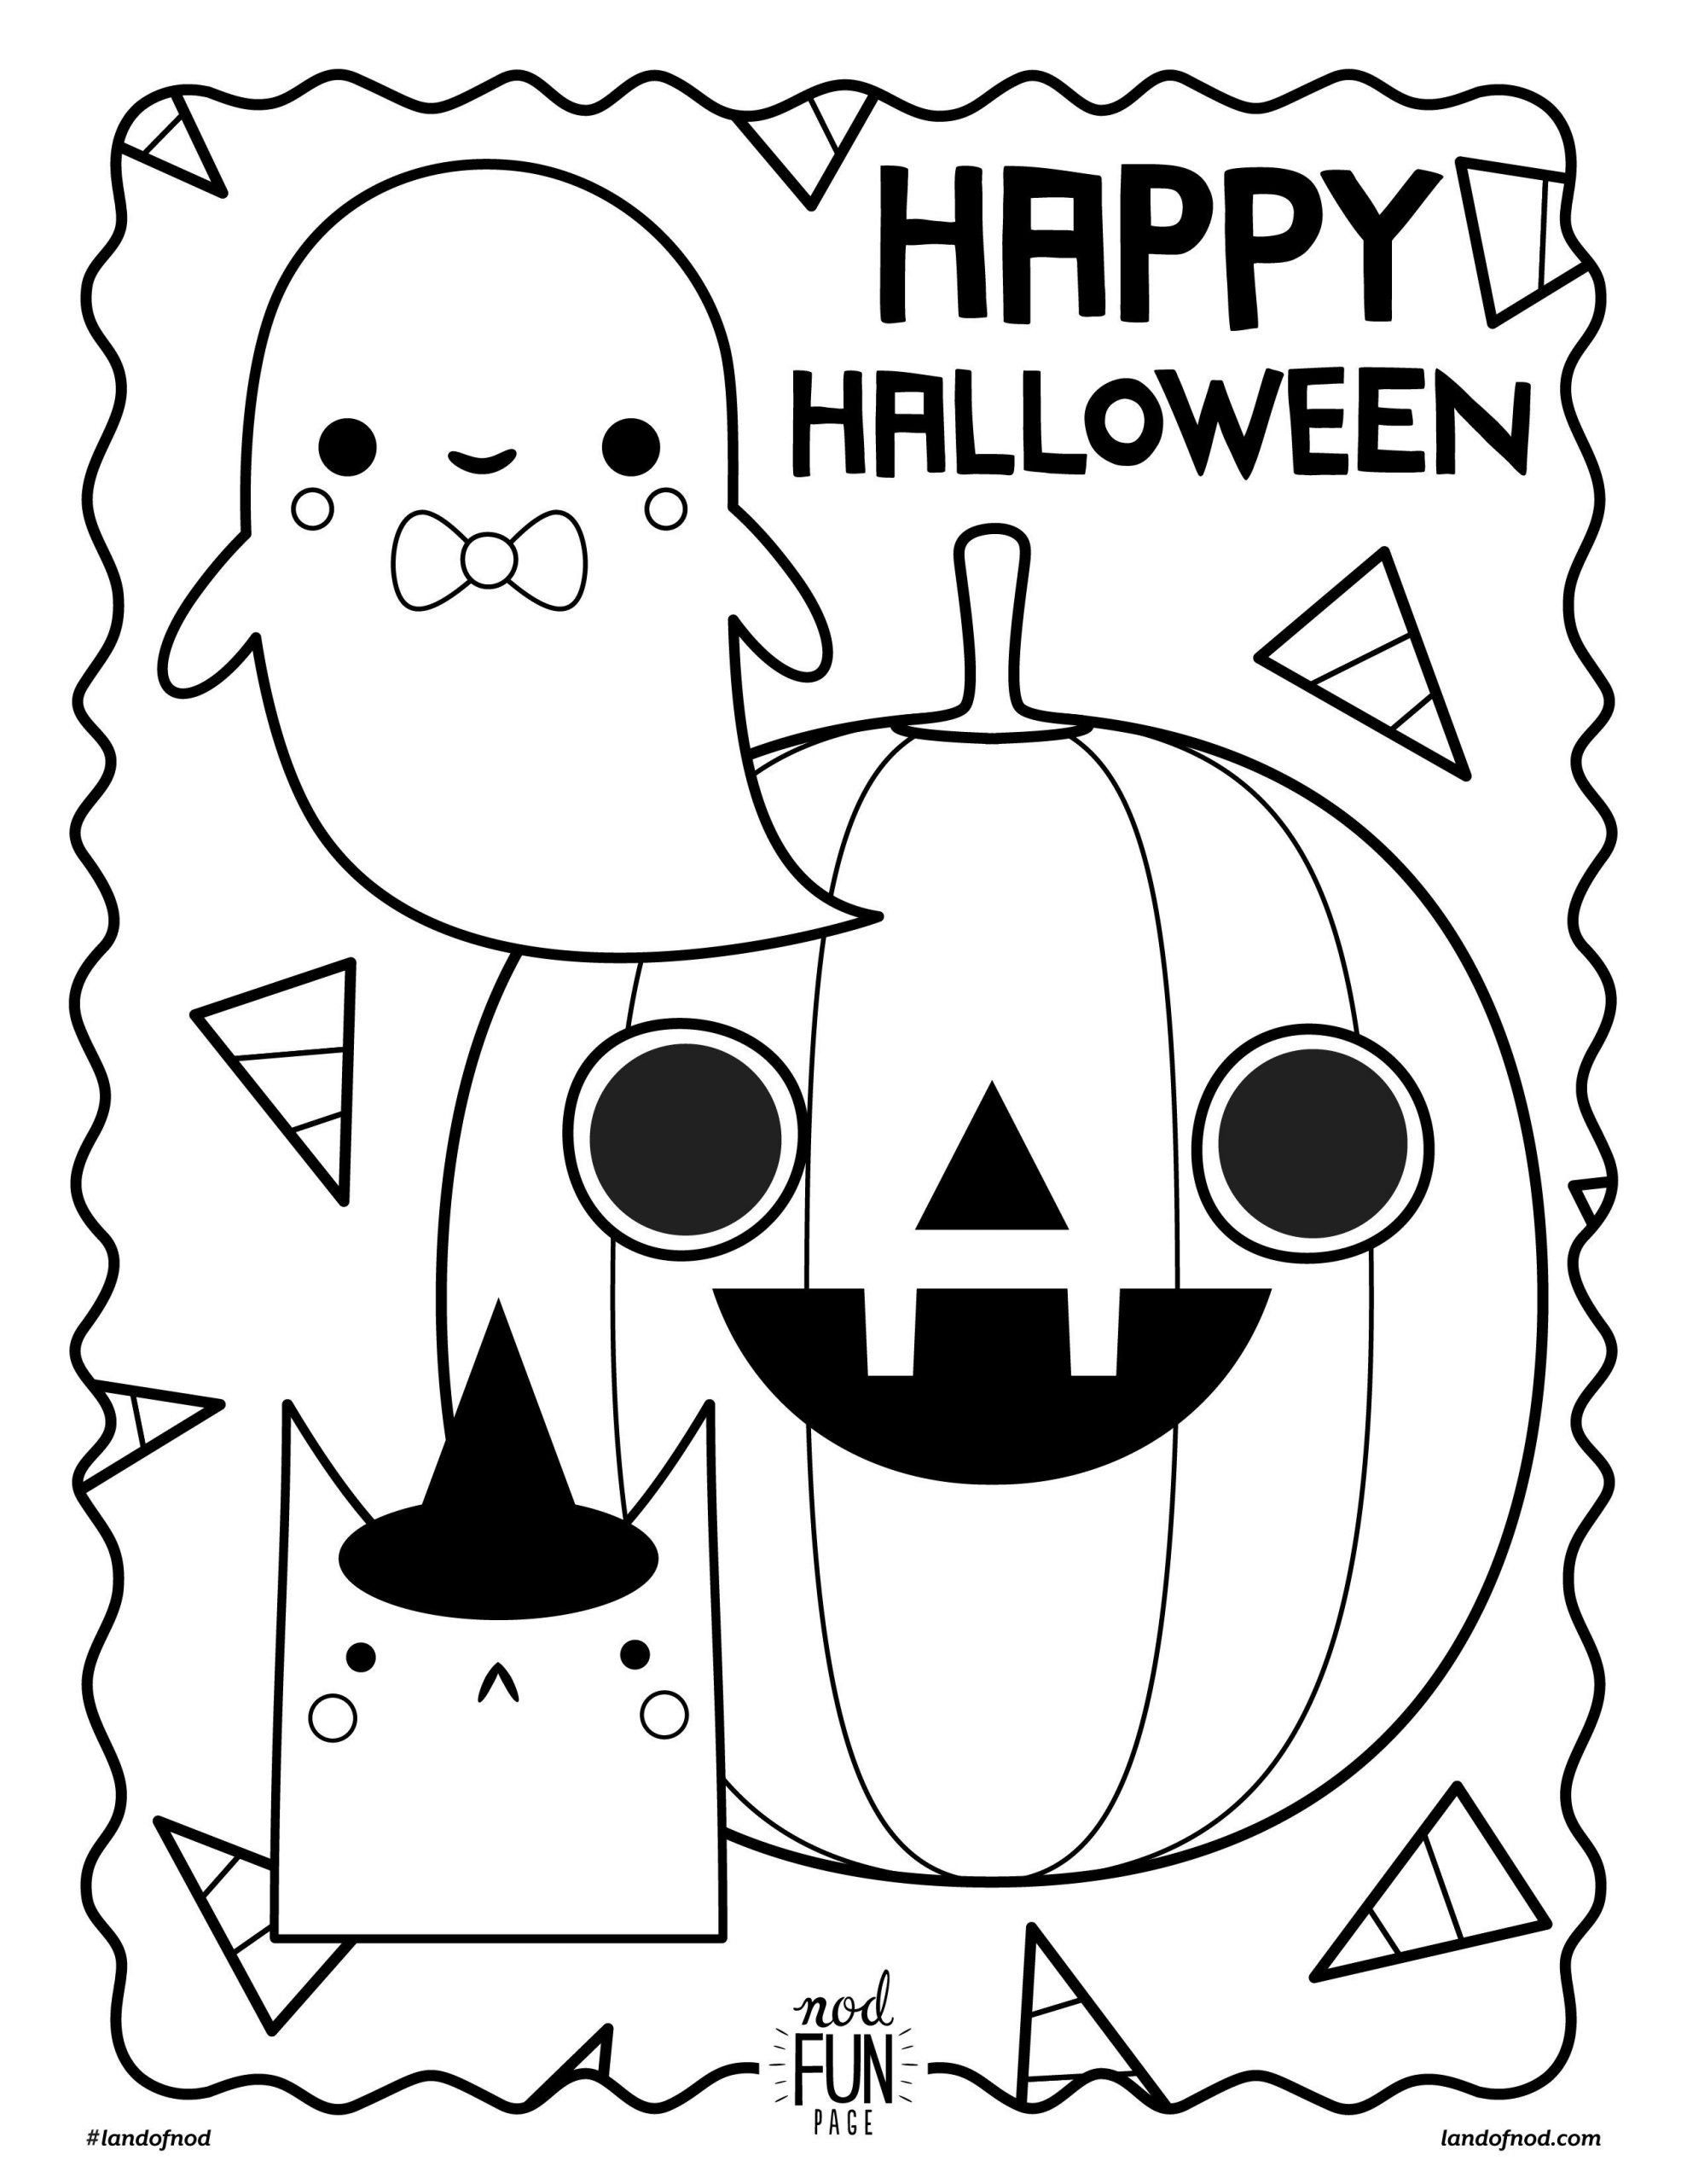 halloween-free-printable-for-transfers-prints-tags-anything-at-all